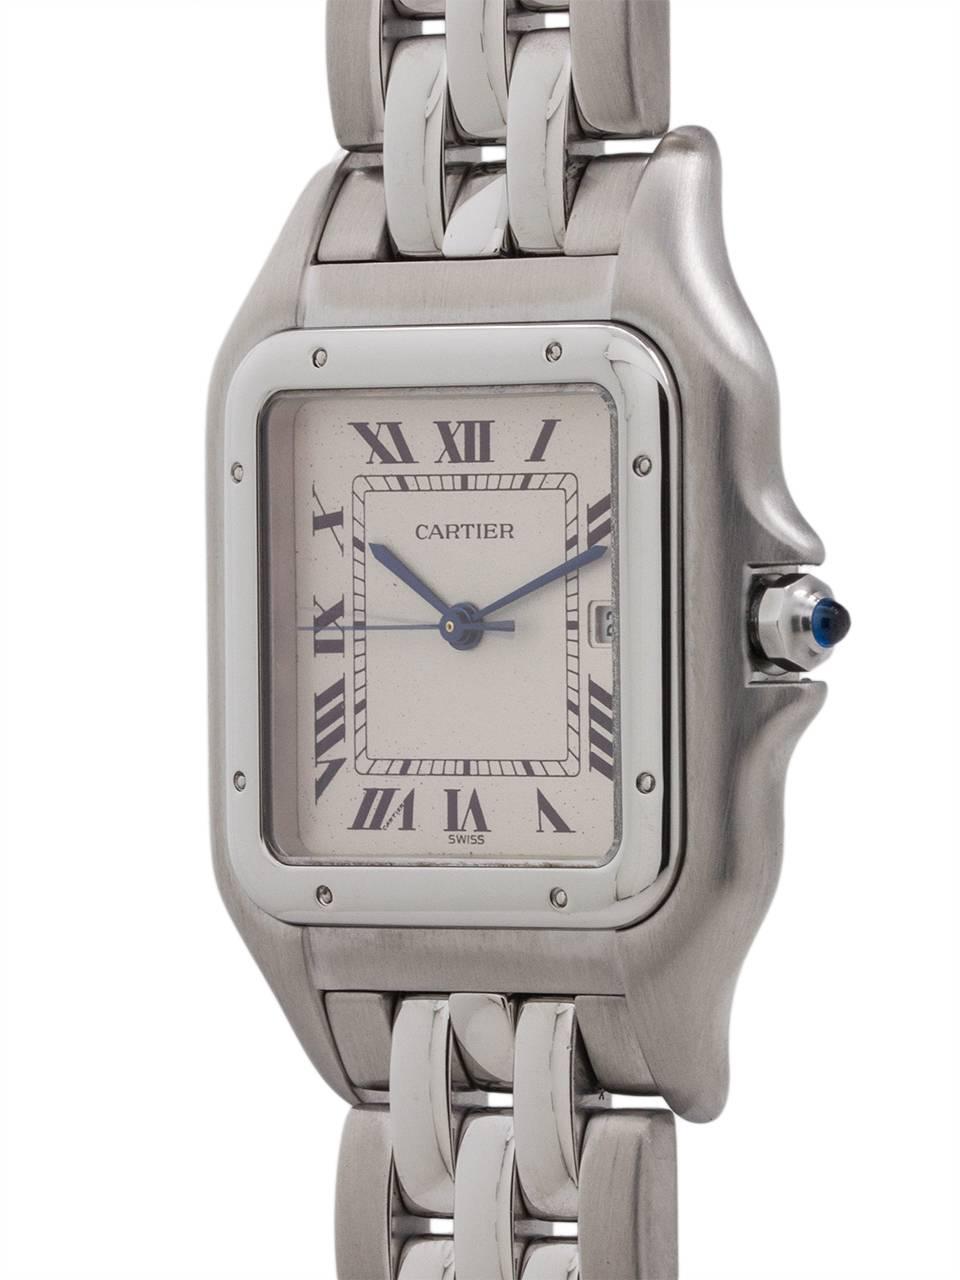 
Cartier Man’s Panther Jumbo Stainless Steel circa 1990’s. This is the larger 30 X 40mm case size. Silvered grained dial, sapphire crystal, cabochon sapphire crown, battery powered quartz movement and heavy rice link bracelet with deployment clasp.